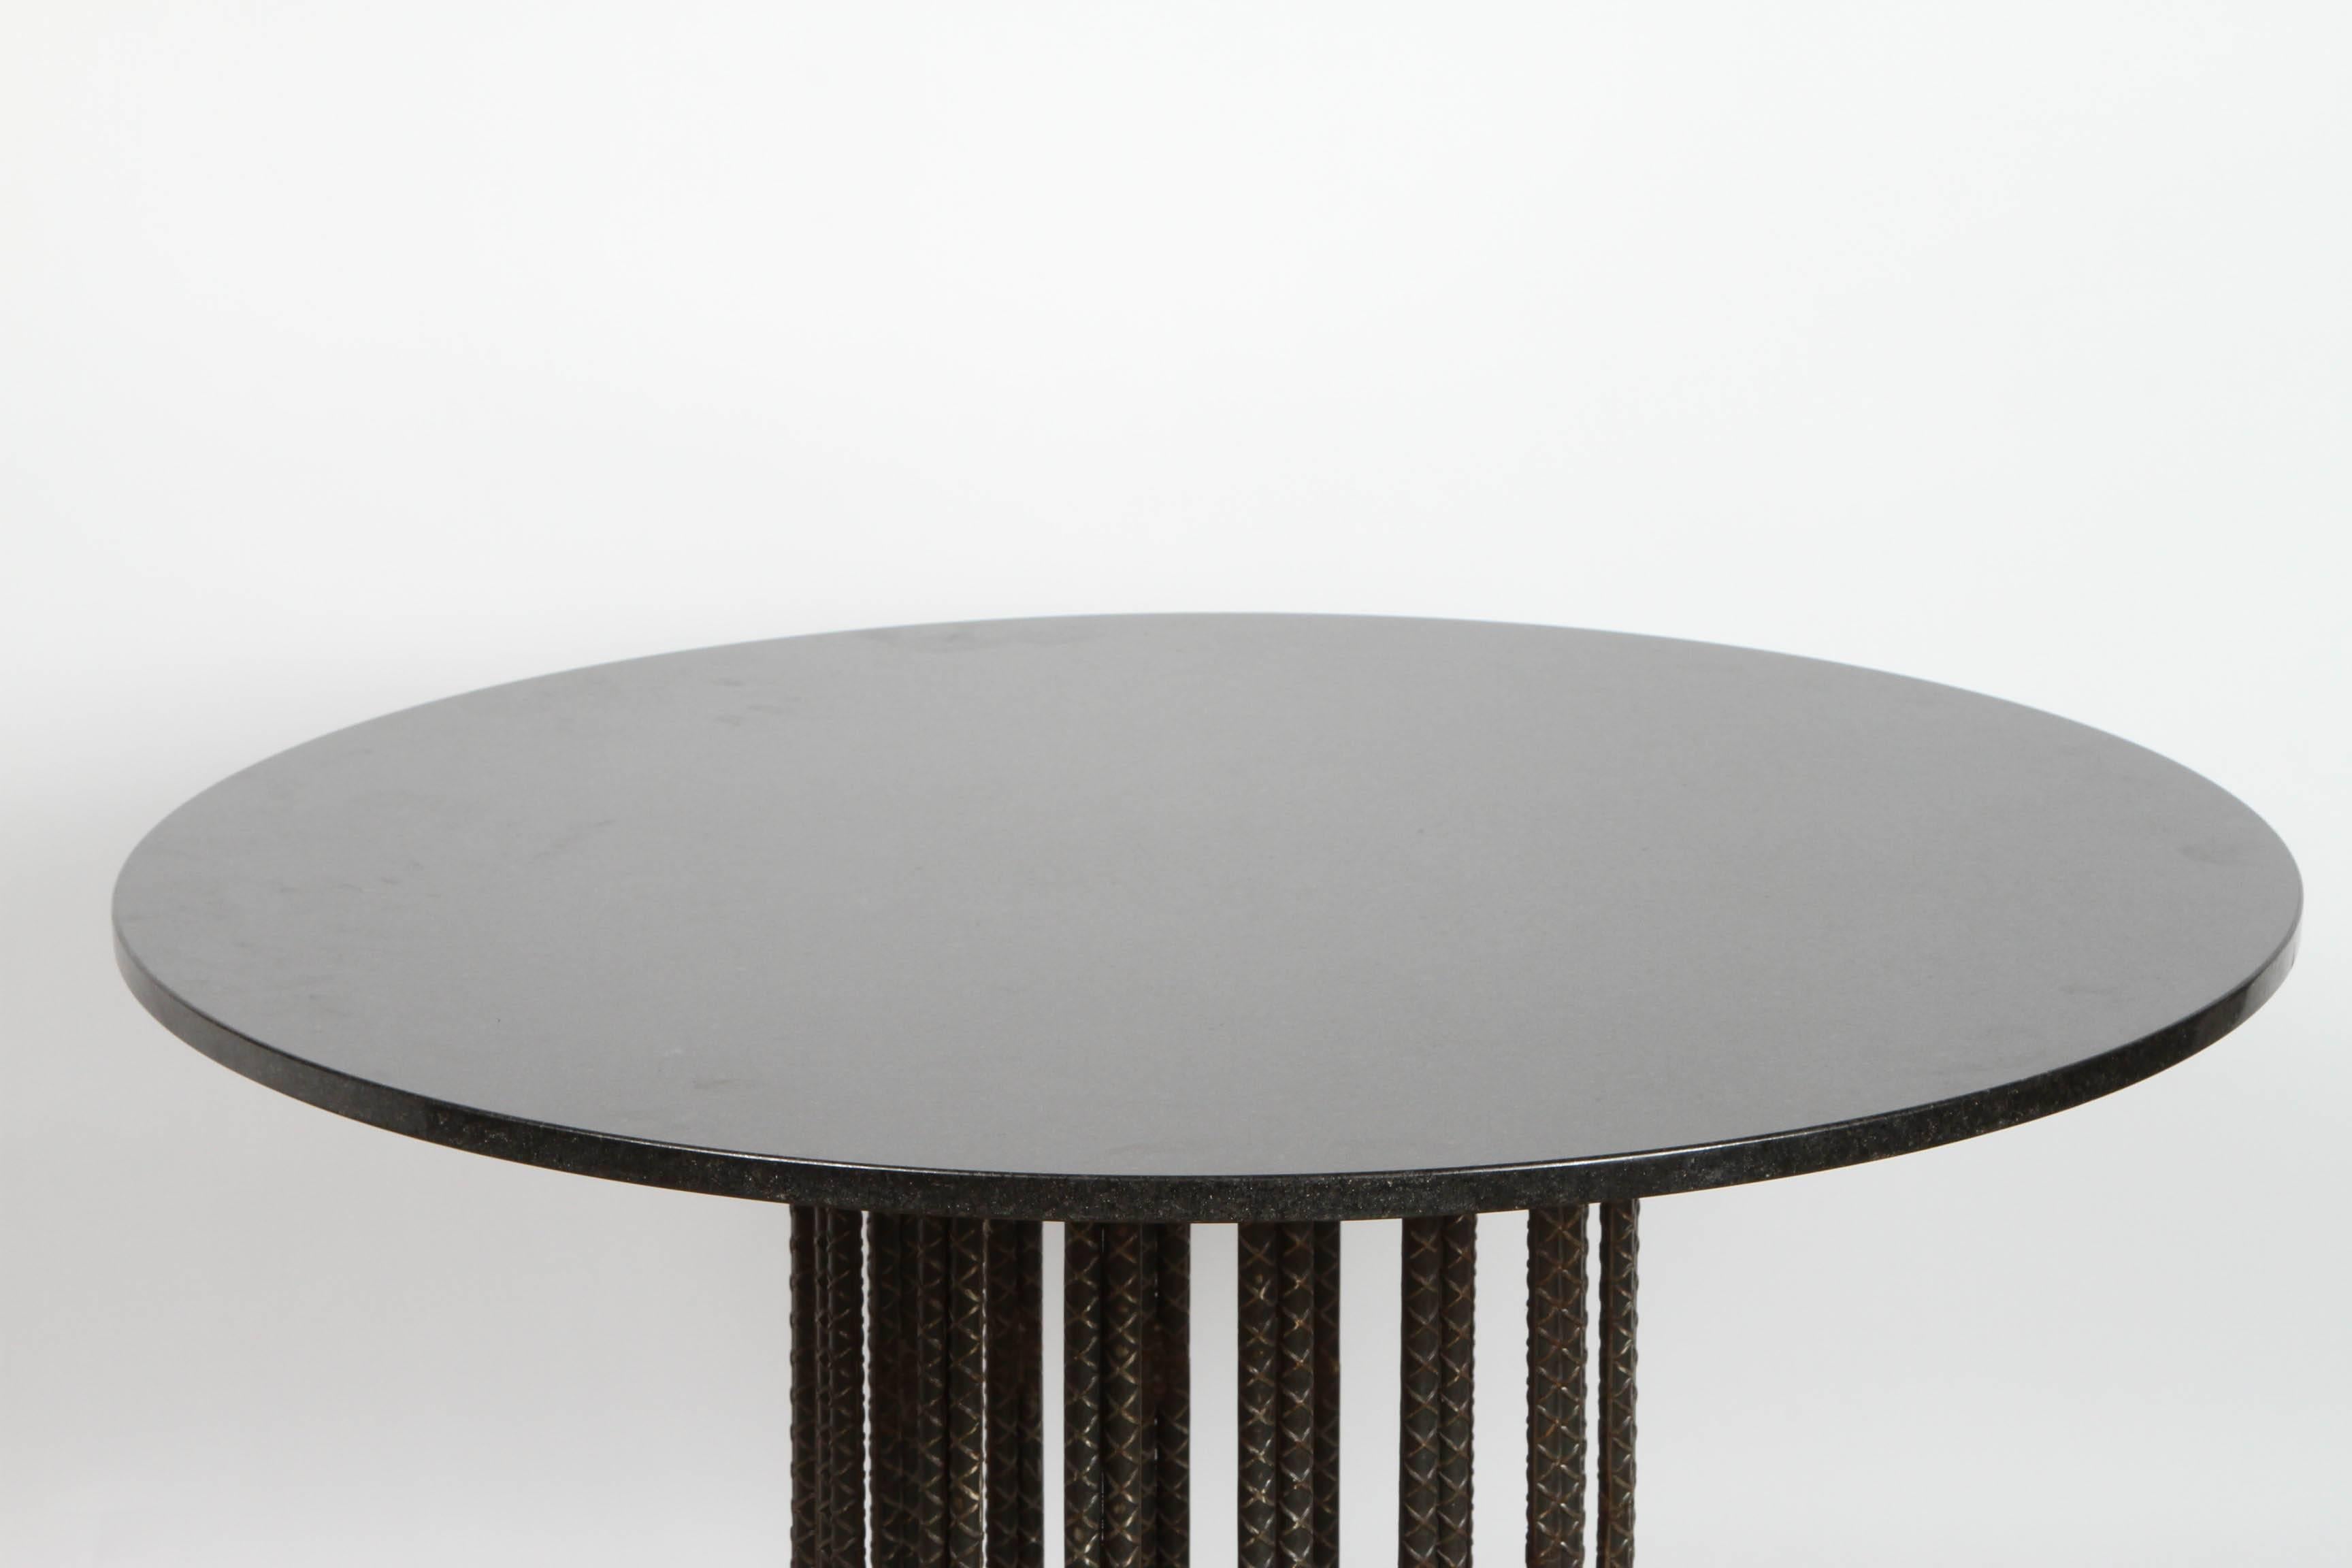 Formed from multiple loops of rebar this circular table supports and round granite top. Unsigned.